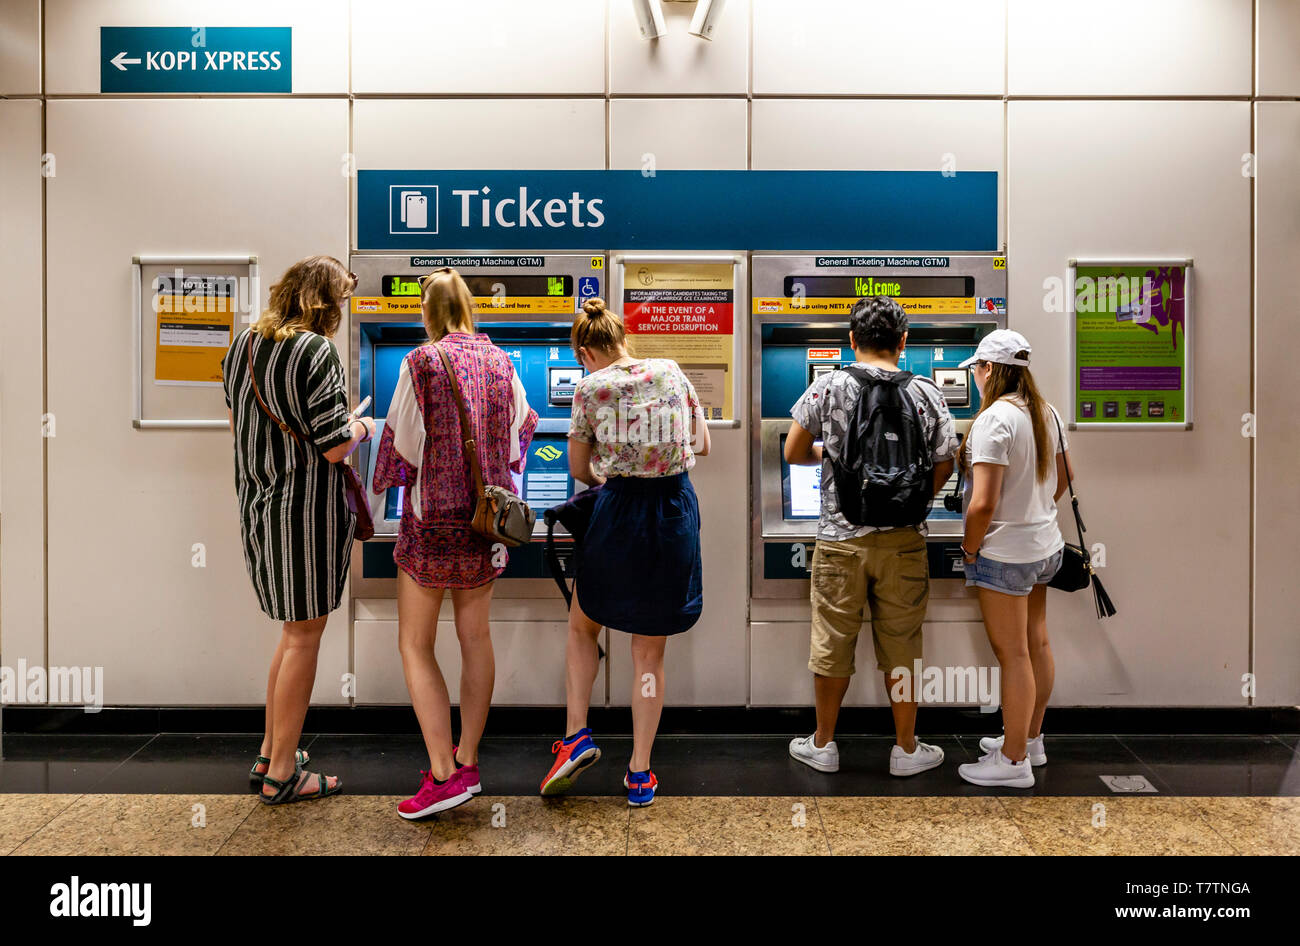 Tourists Buying Tickets At An MRT Station, Singapore, South East Asia Stock Photo